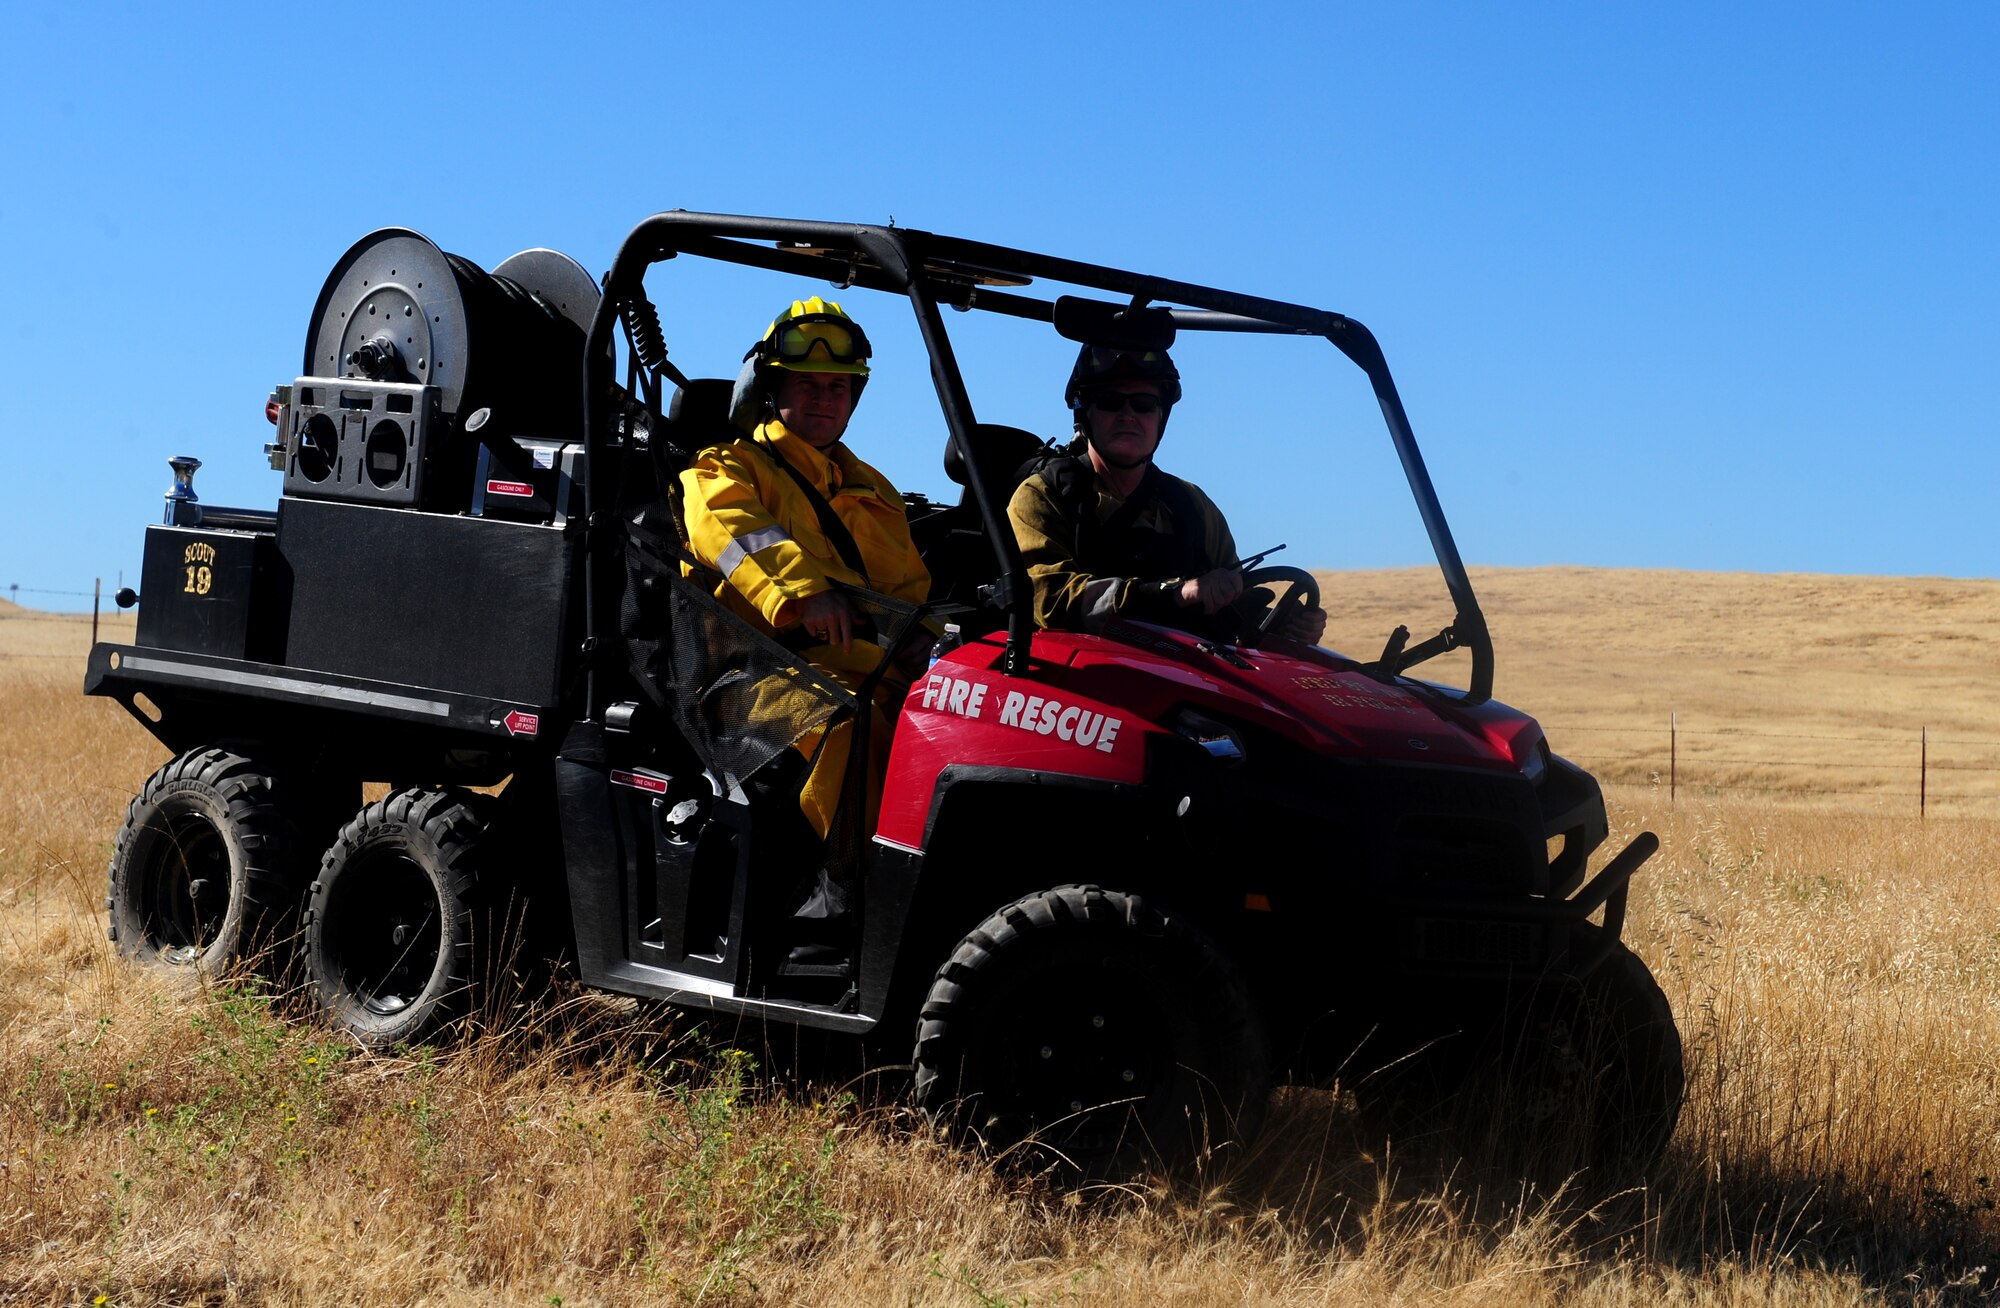 Col. Phil Stewart (left), 9th Reconnaissance Wing commander, rides in an off-road scout vehicle during a prescribed burn exercise at Beale Air Force Base, Calif., June 27, 2013. A prescribed burn is used to combat potential wild fires. (U.S. Air Force photo by Airman 1st Class Bobby Cummings/Released)